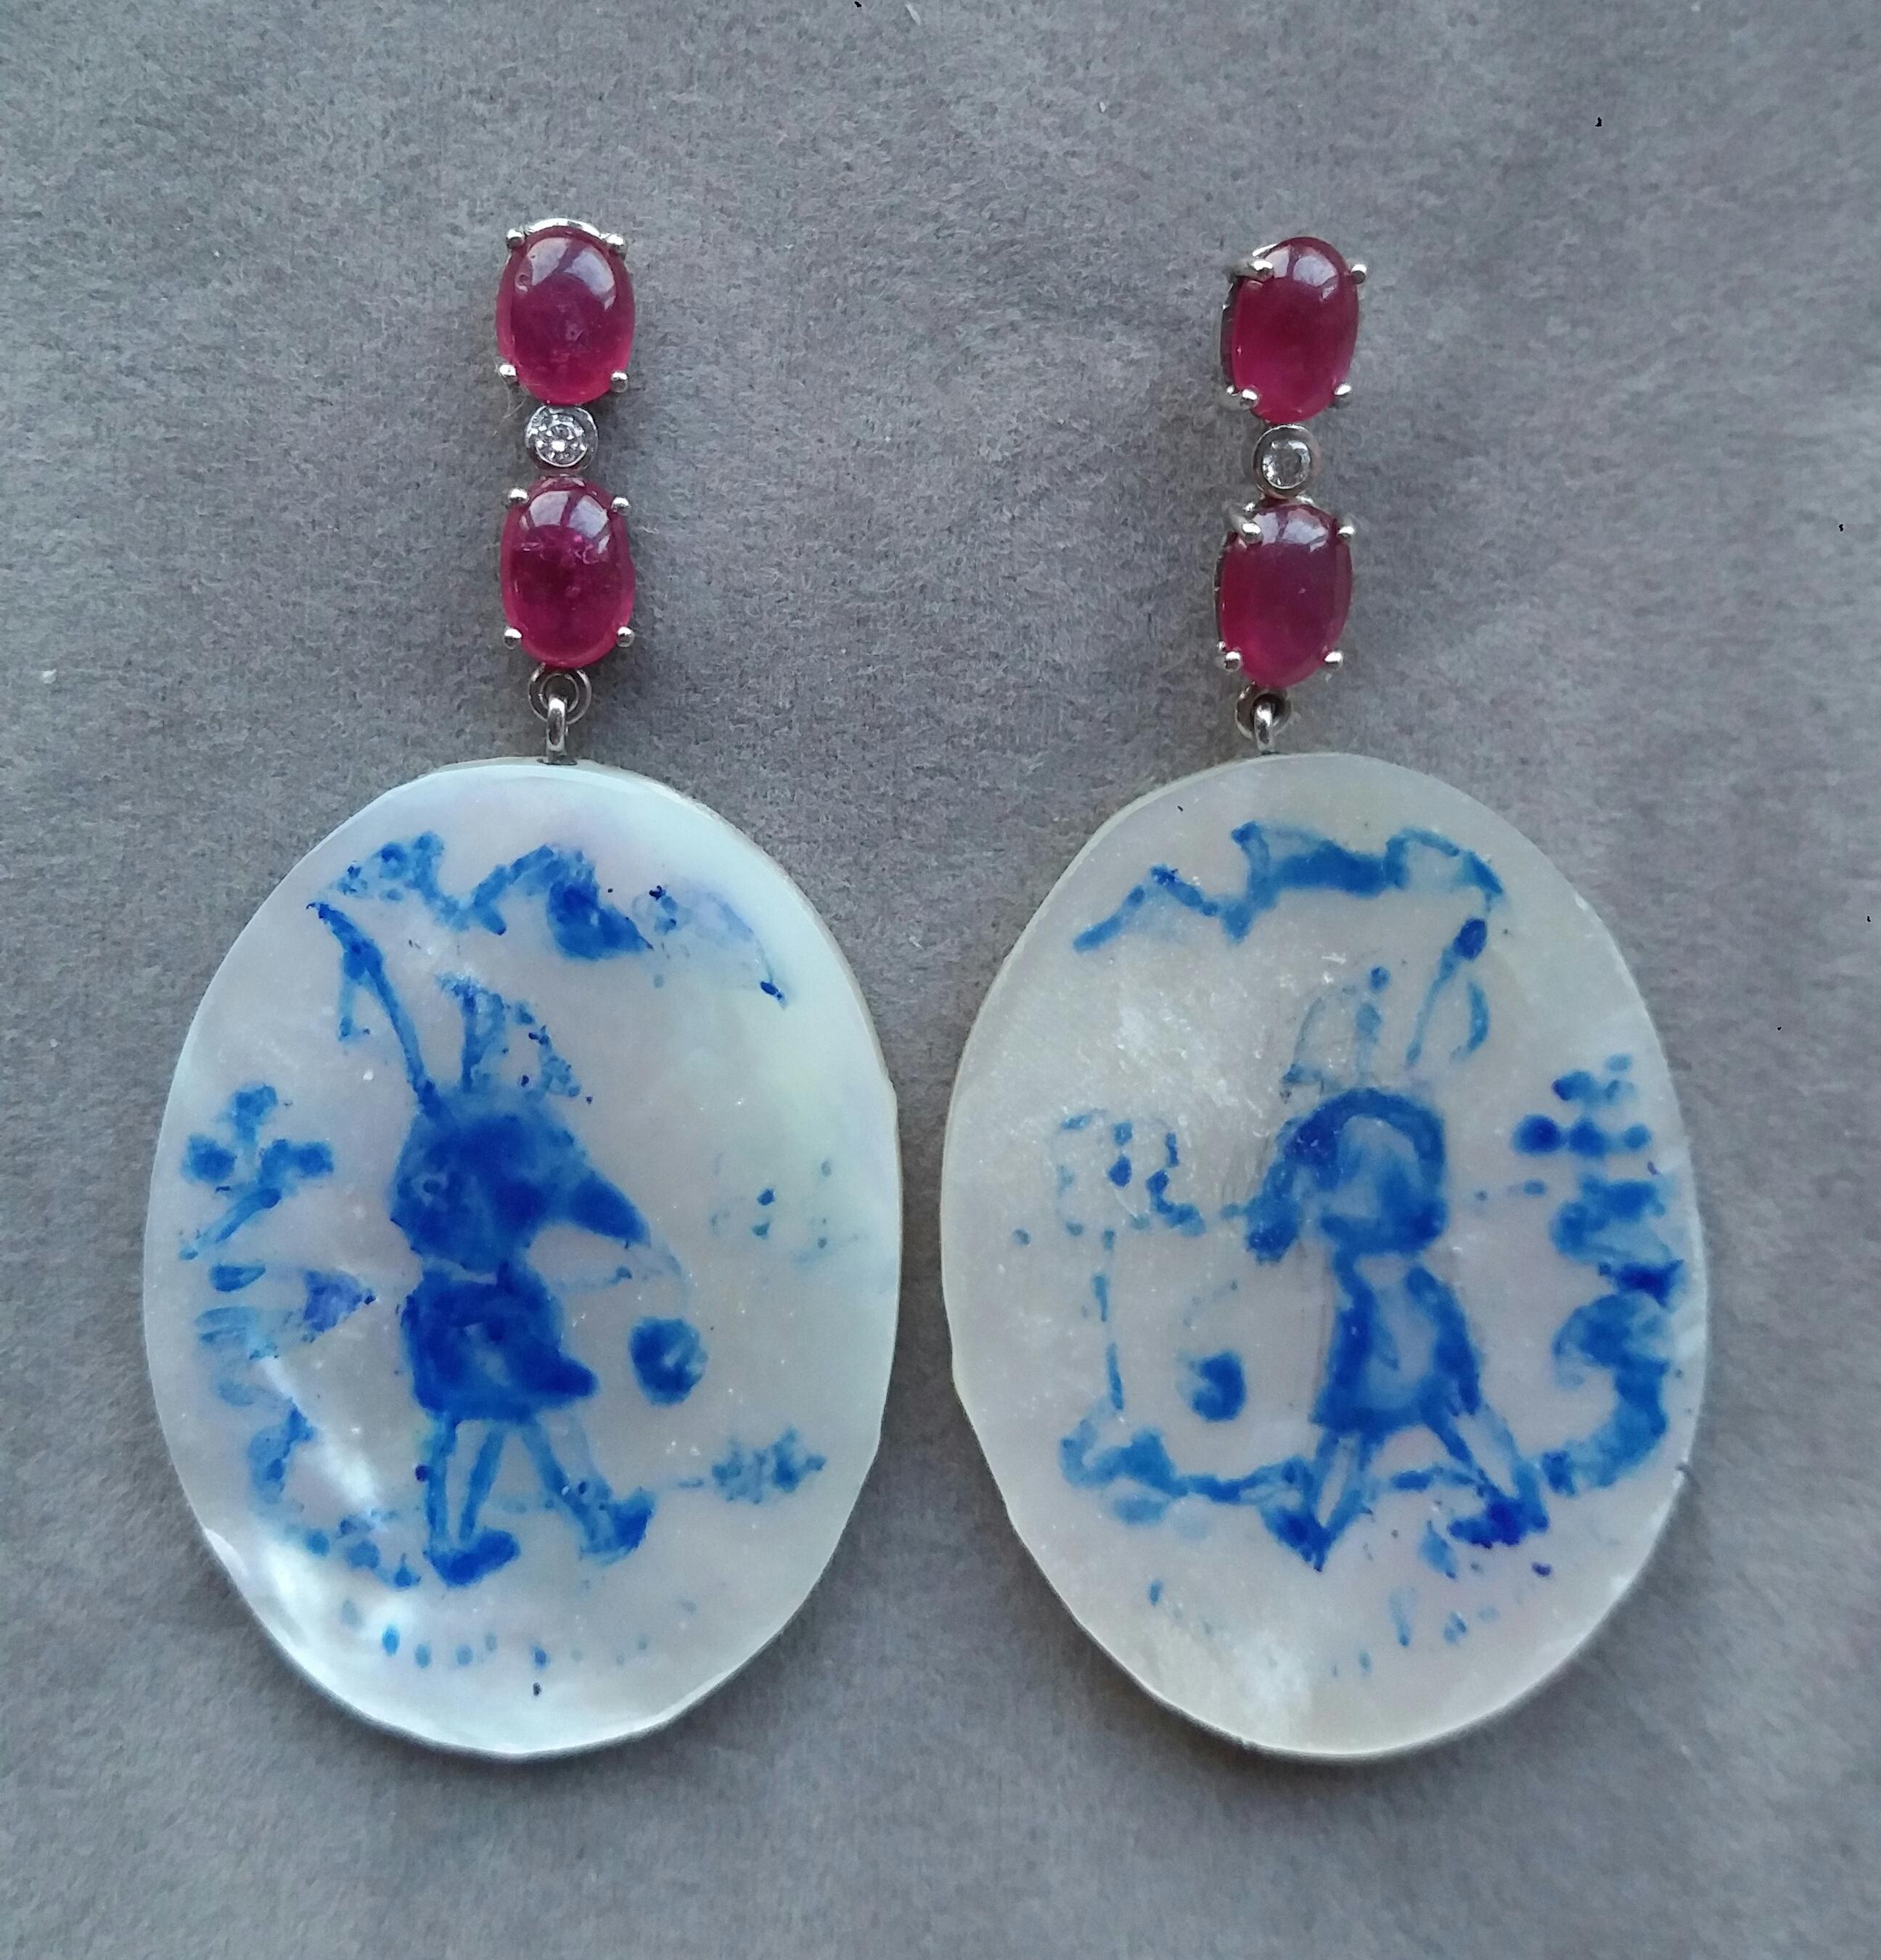 Vintage pair of oval shape hand painted Mother of Pearl measuring 28 mm x 40 mm, depicting a chinese fisherman walking near the river,suspended from a Gold bar with 2 oval Ruby cabs each measuring 4x5 mm with a small full cut diamond in the